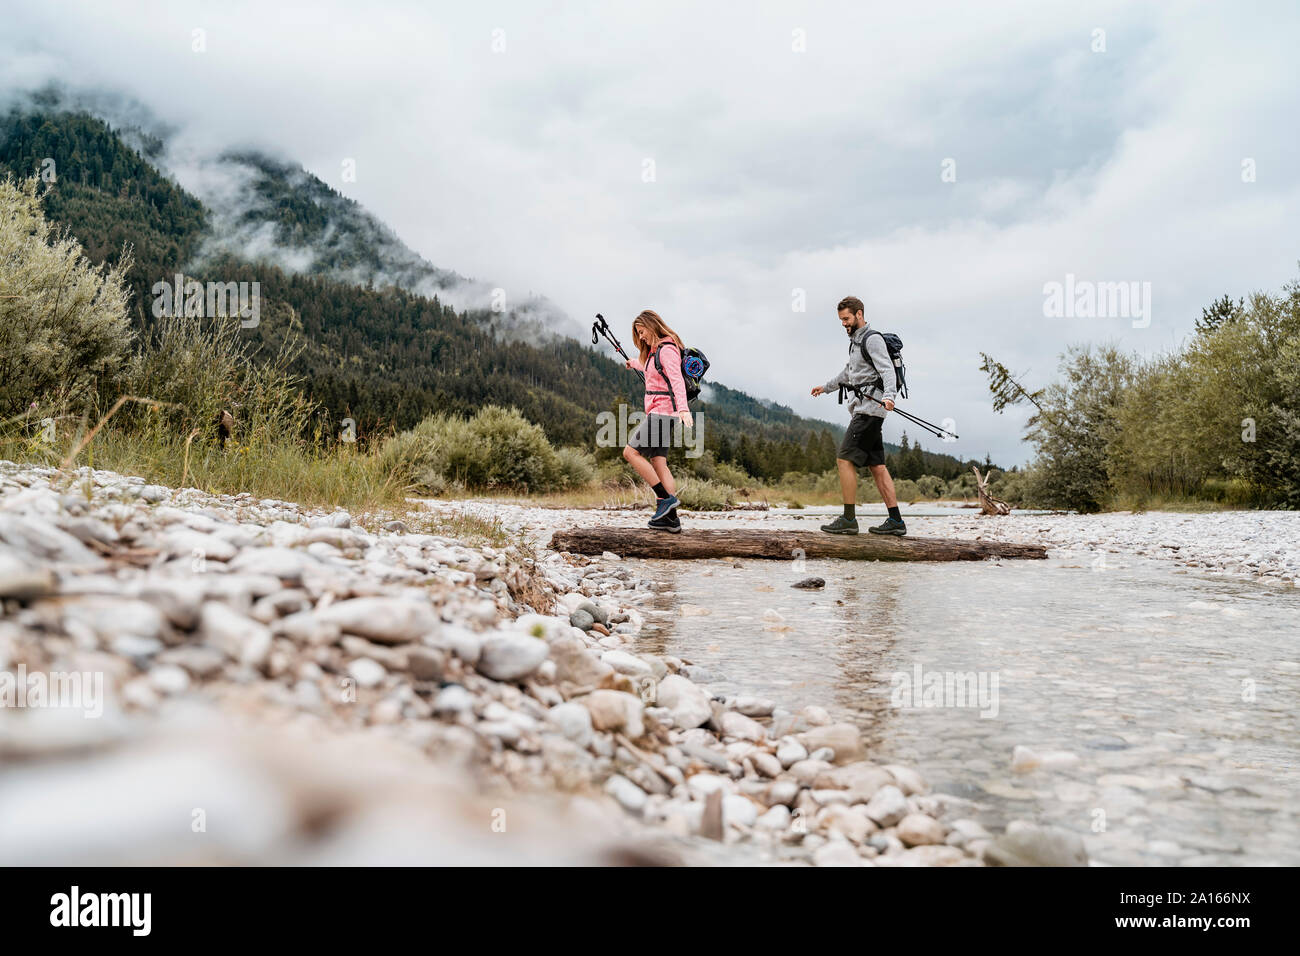 Young couple on a hiking trip crossing river on a log, Vorderriss, Bavaria, Germany Stock Photo